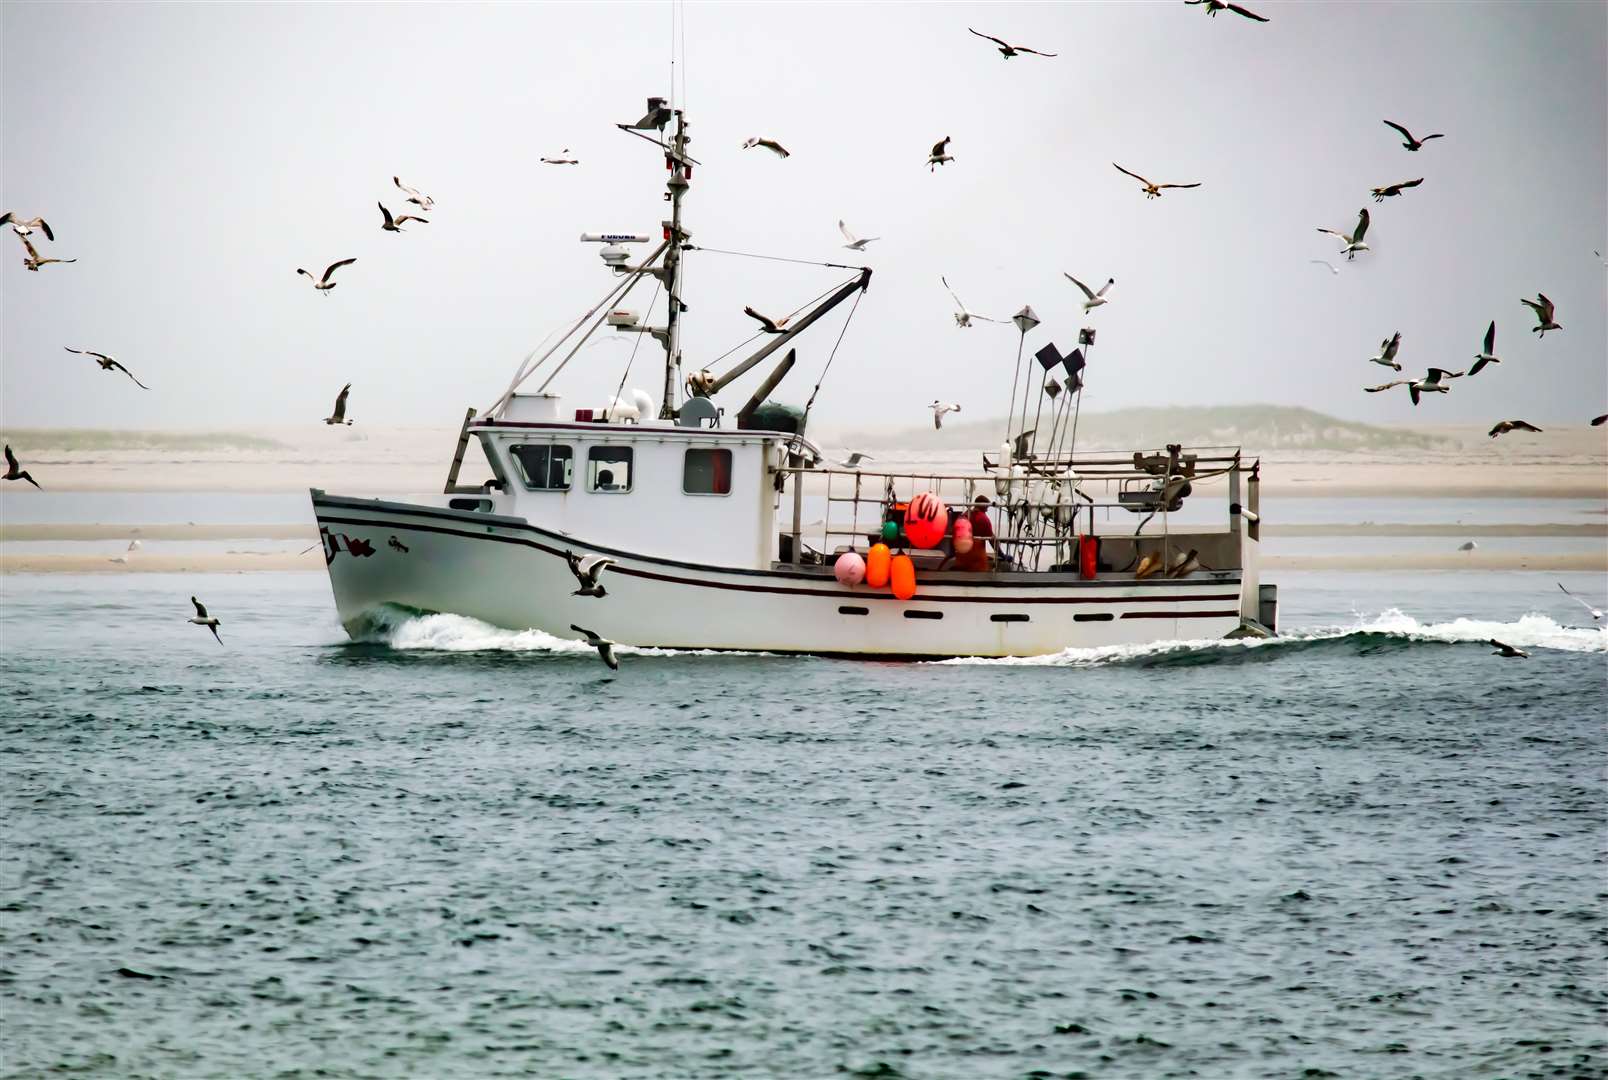 The new Code of Practice for Small Fishing Vessels has come into force.